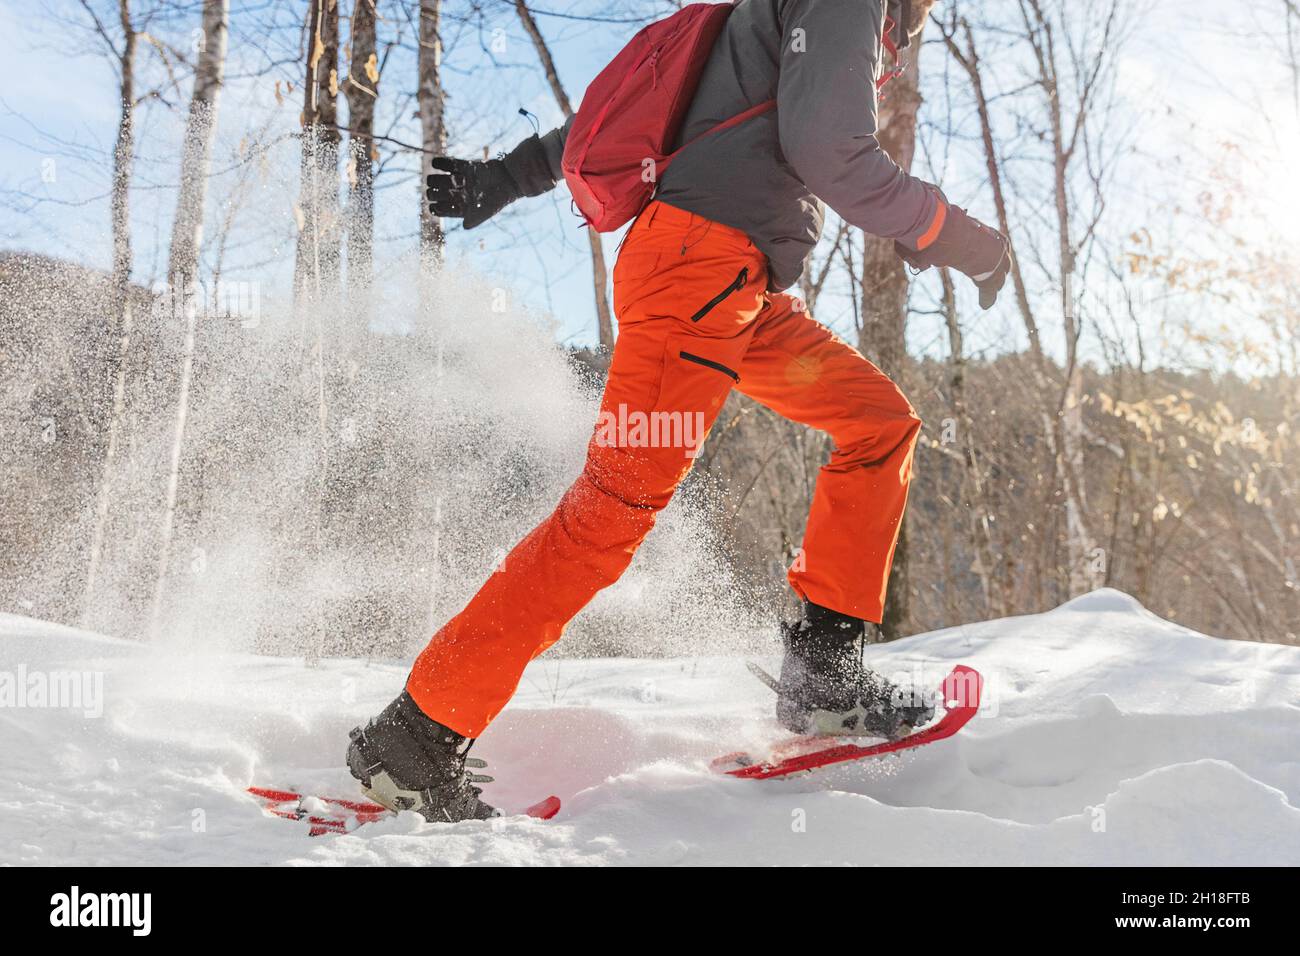 Winter sport outdoor activity man running in snow in snowshoes having fun snowing outside Stock Photo